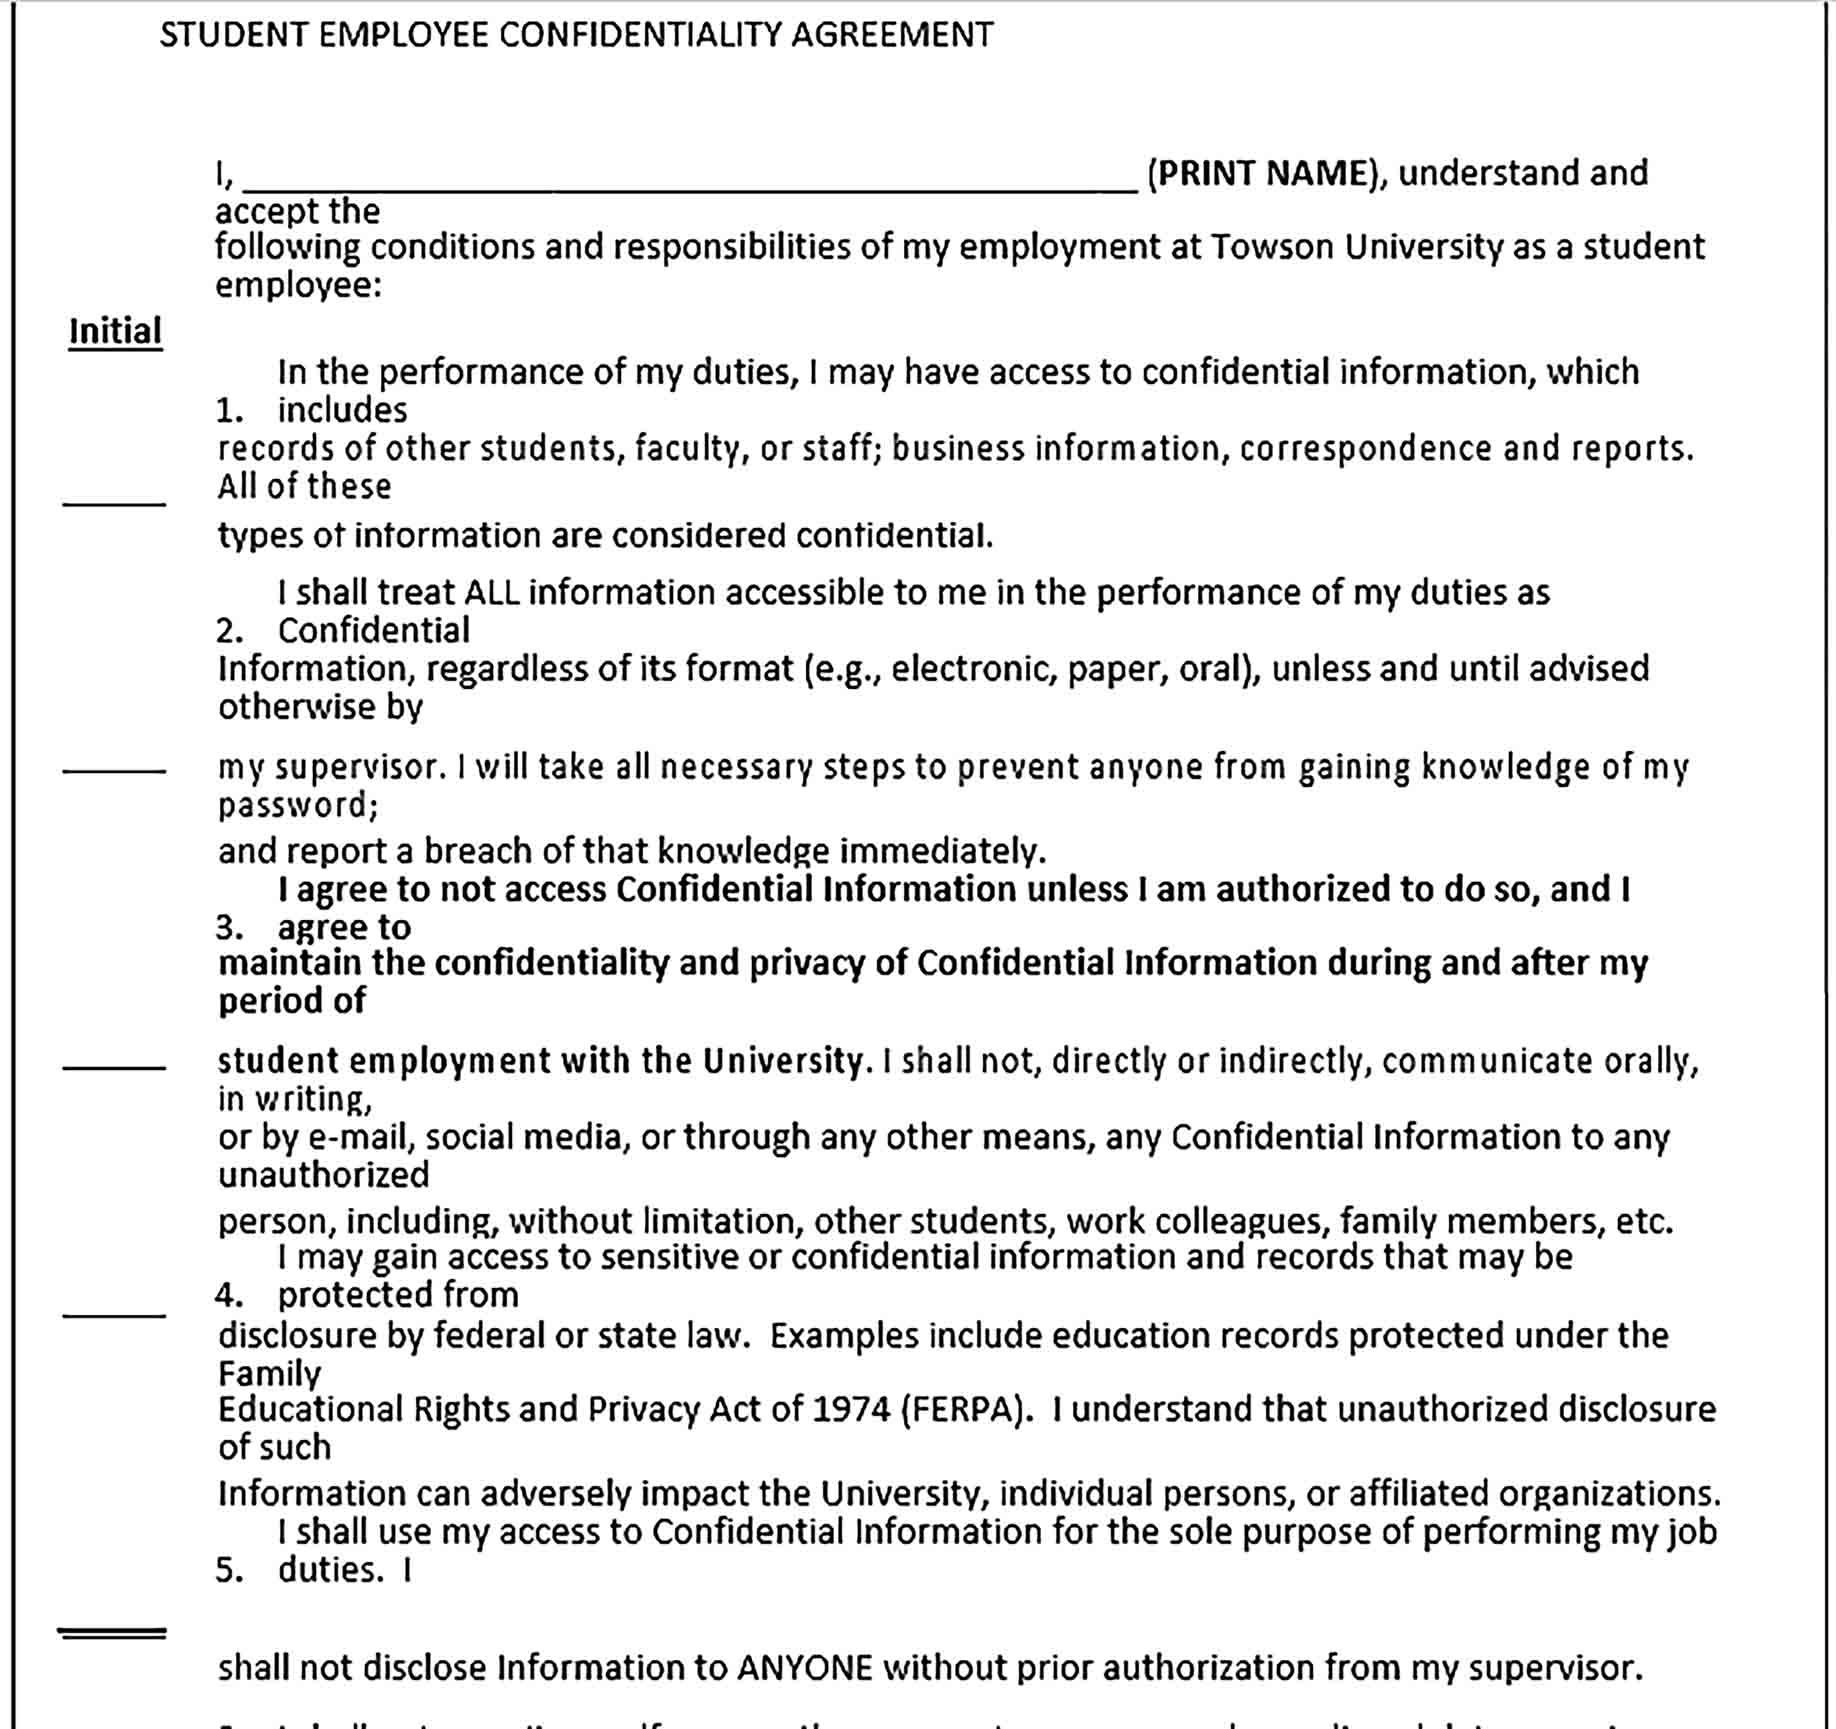 Sample Student Employment Confidentiality Agreement